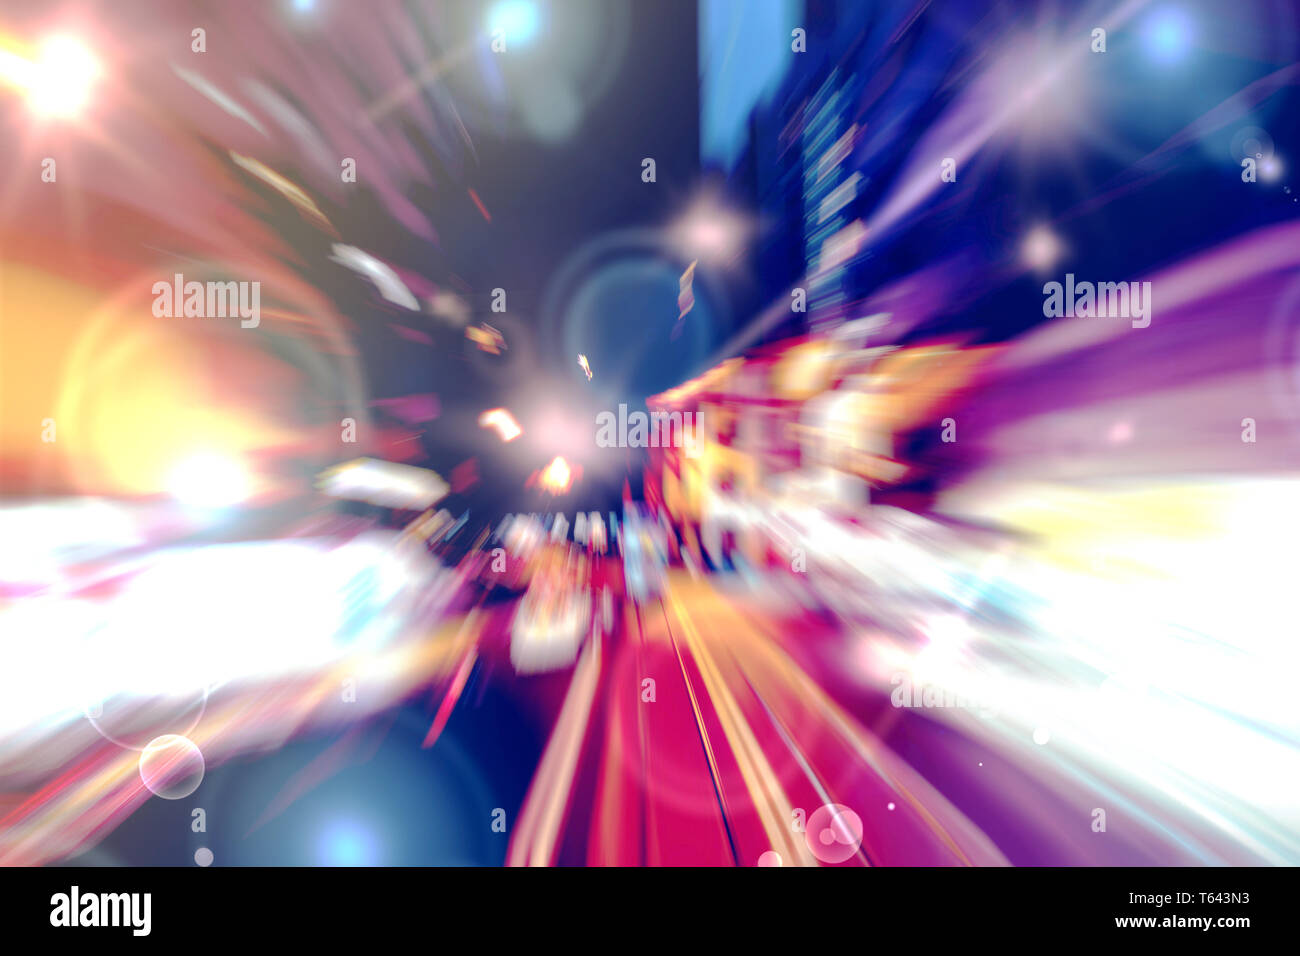 Abstract image of light trails with bokeh circle Stock Photo